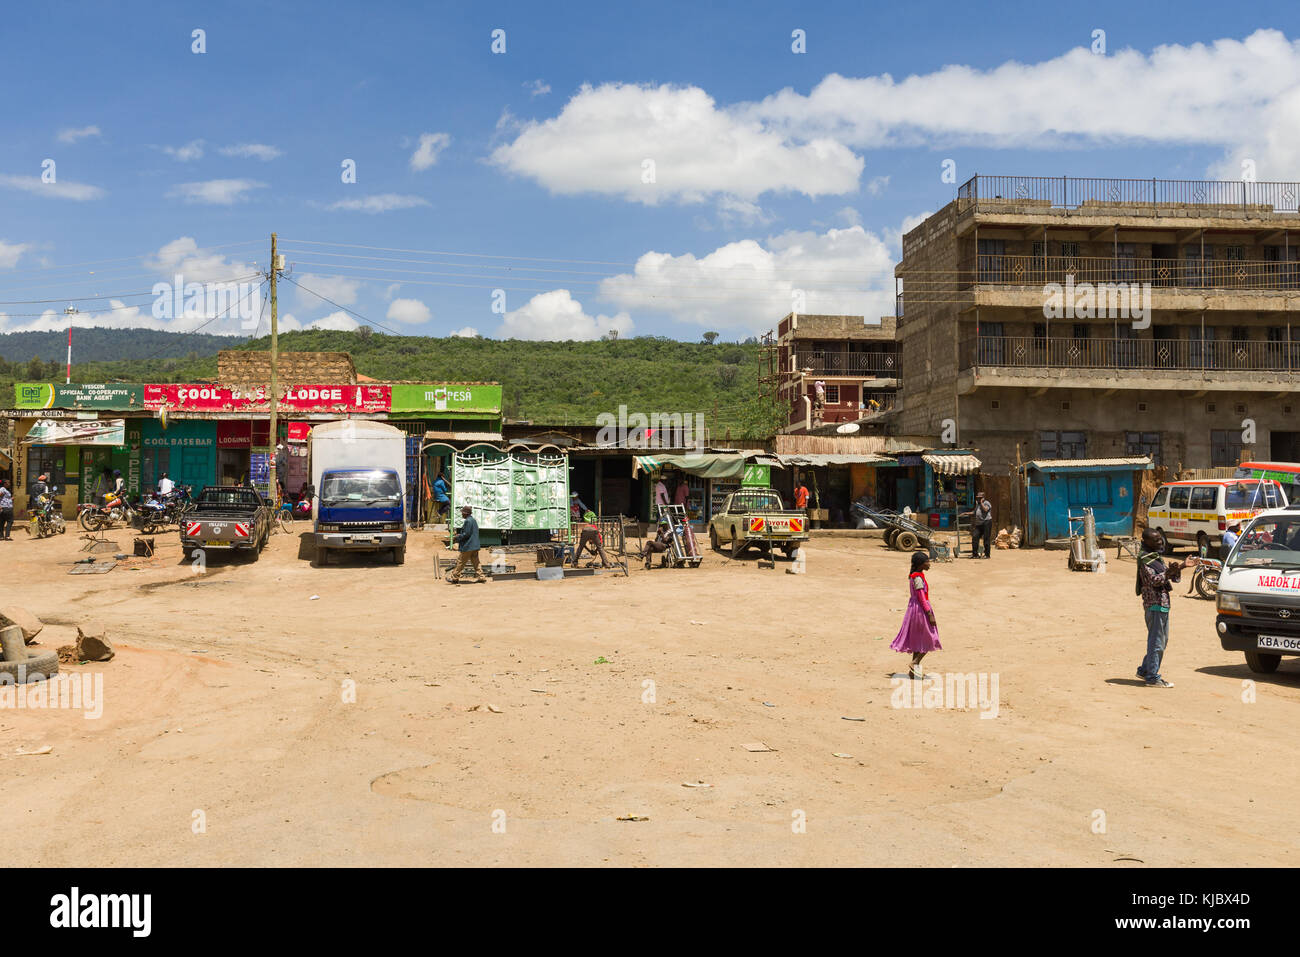 A view of Mai Mahiu town with people going about daily life with buildings and shops in background, Kenya Stock Photo